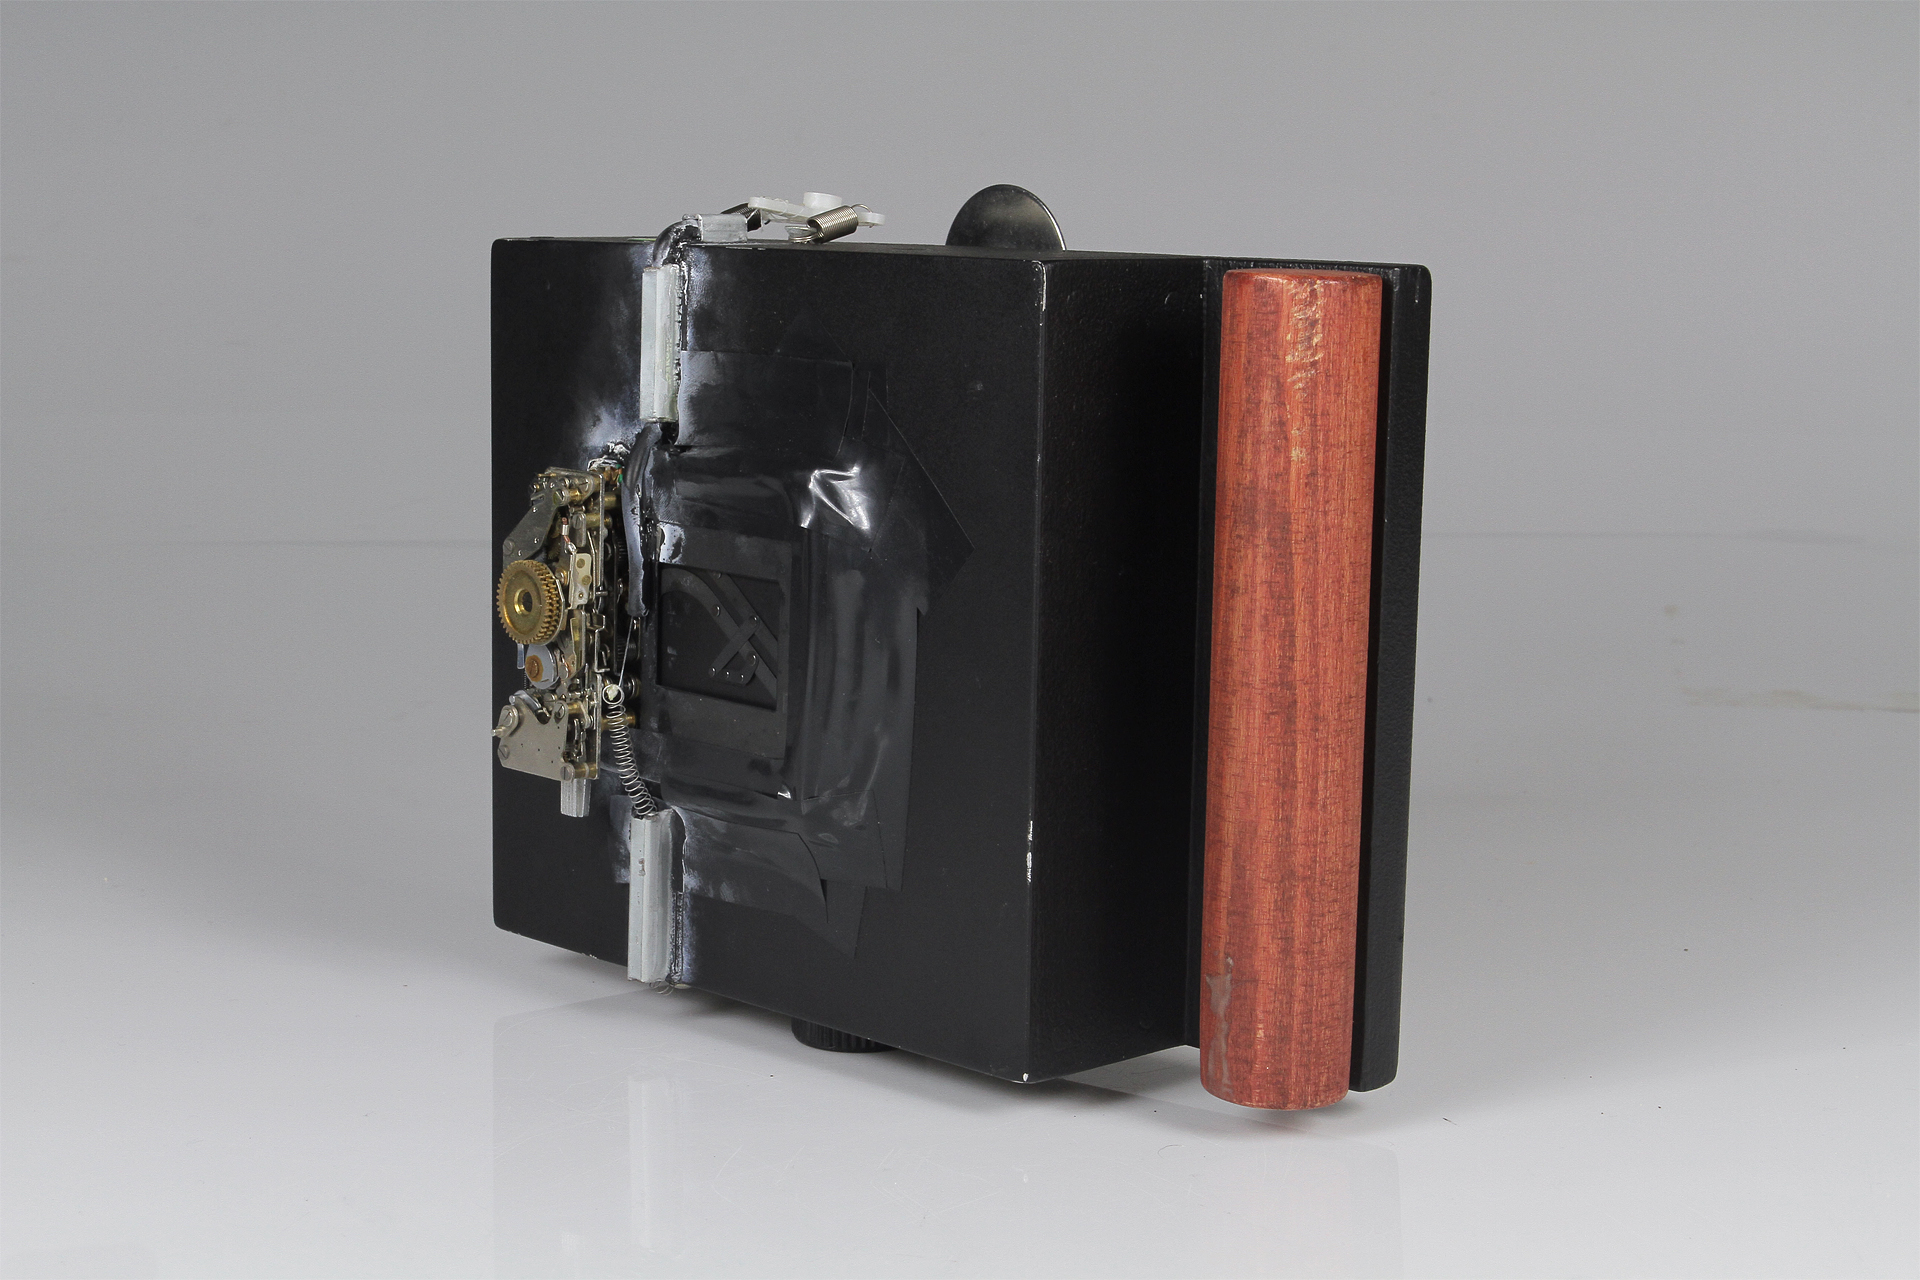   " Copernicus Mk. III"&nbsp;   2016.&nbsp; Modified pinhole camera for the series  Earth at 970MPH.&nbsp;  4x5" Pinhole camera, salvaged mechanical SLR shutter, flash bracket, tripod head, air-rifle scope, welder's lens, springs and metal pieces fro